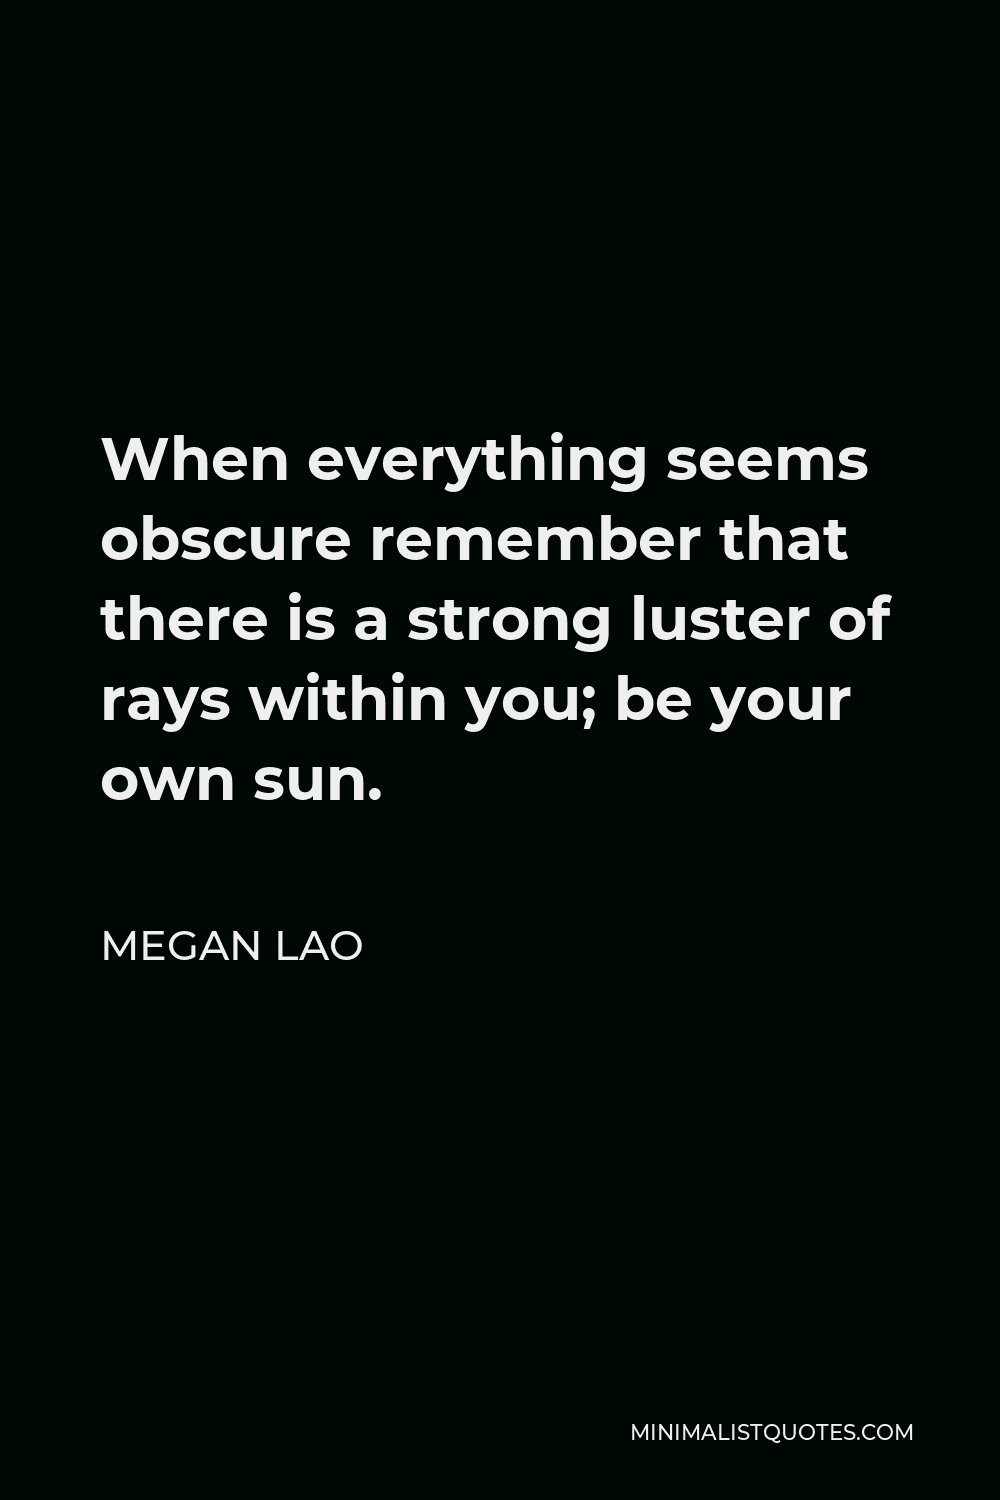 Megan Lao Quote - When everything seems obscure remember that there is a strong luster of rays within you; be your own sun.